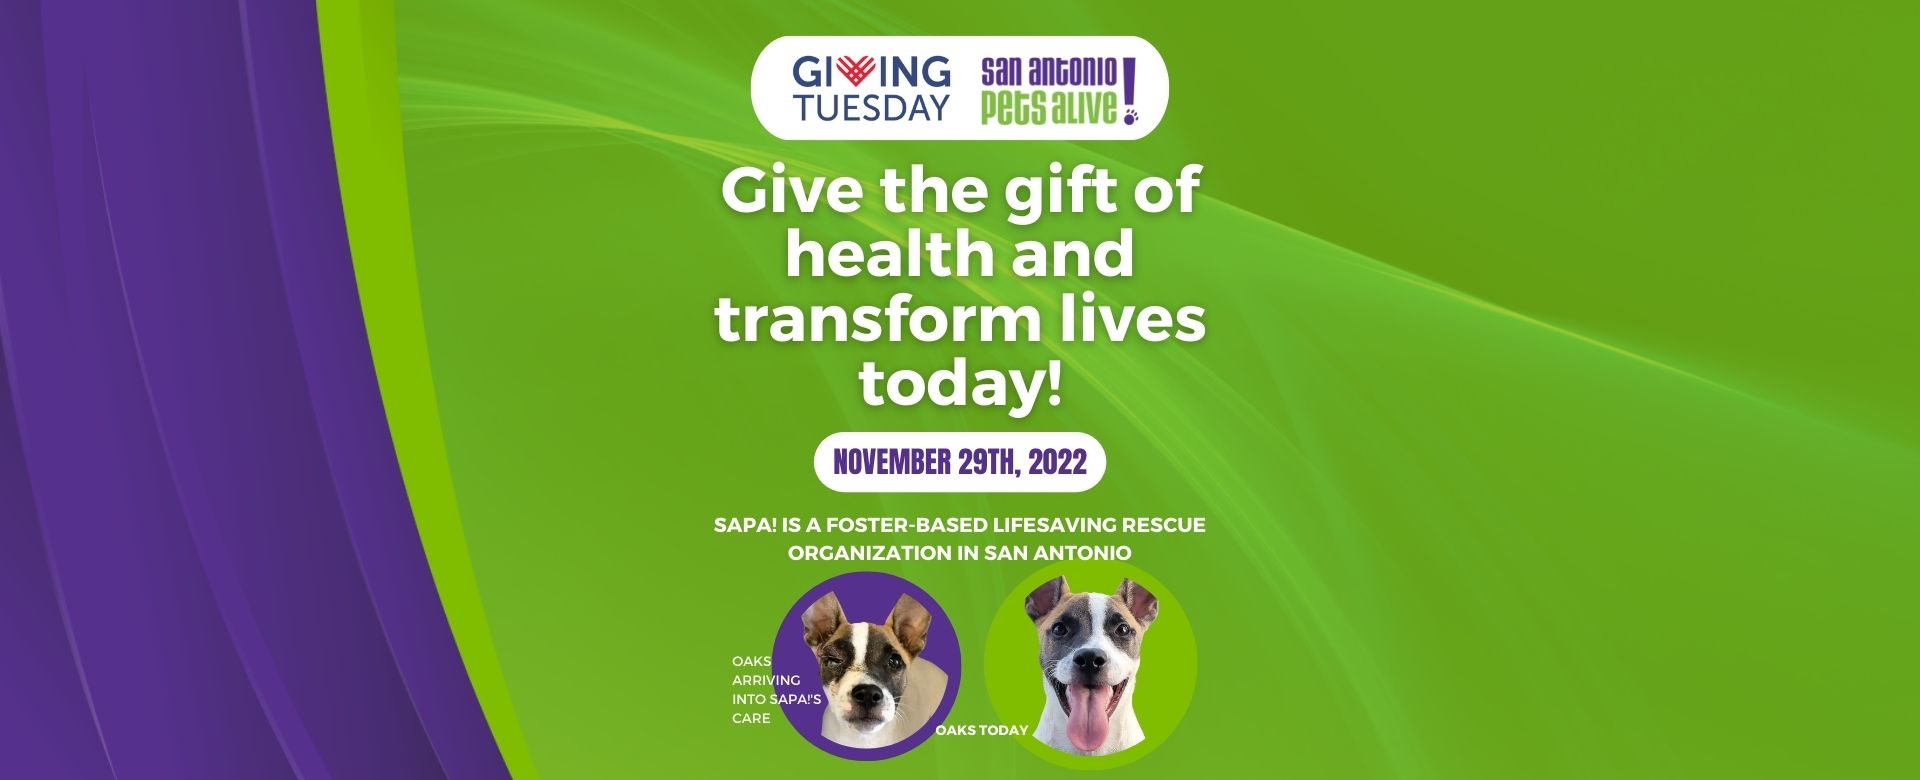 Giving Tuesday - Give the gift of health and transform lives today!